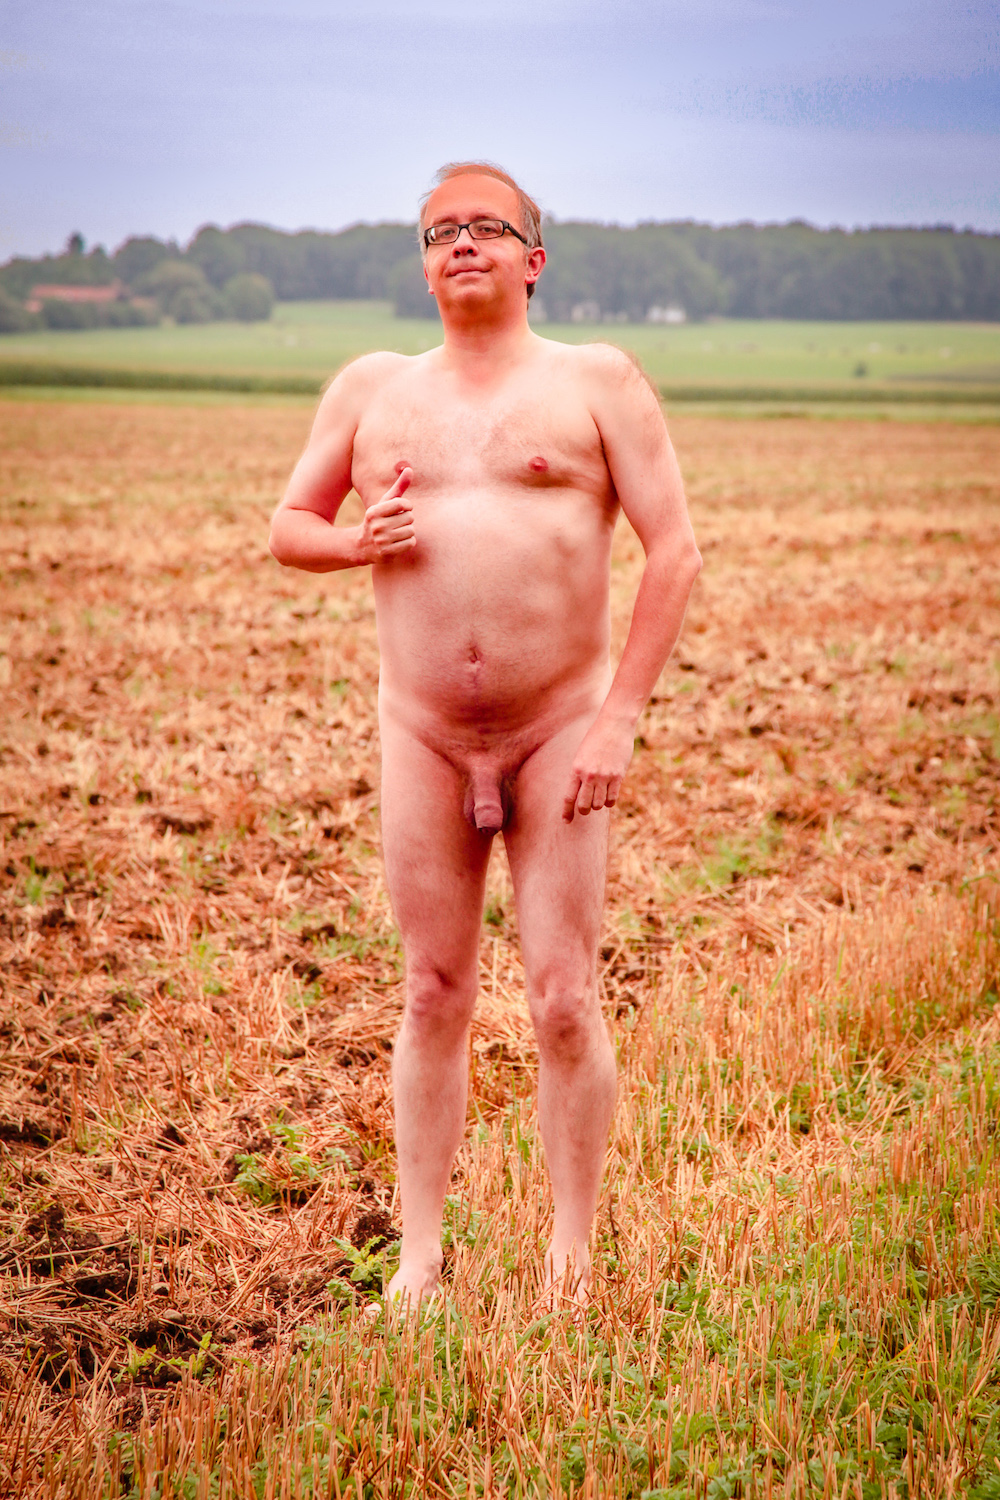 Nude photo of a man in the fields